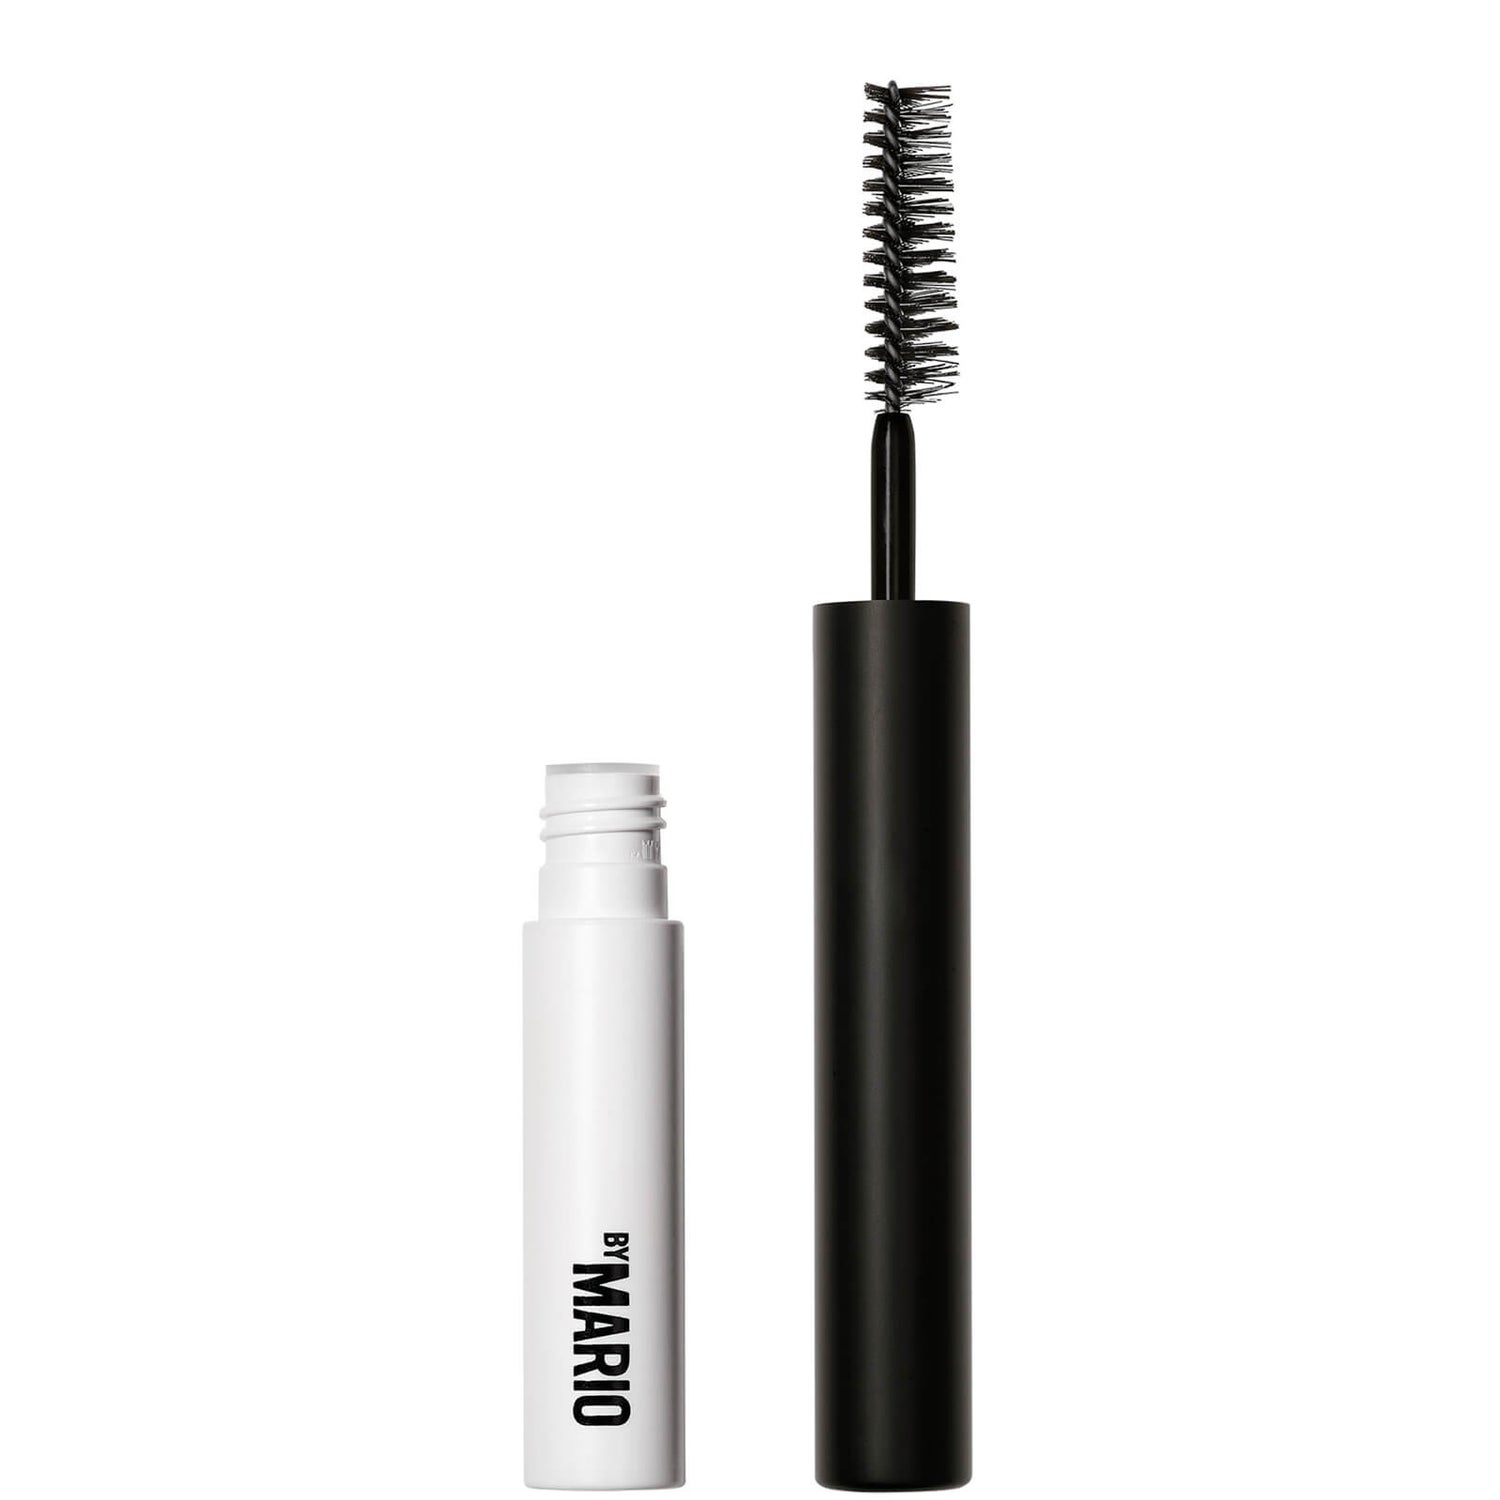 Makeup by Mario Master Hold Brow Gel - Clear 3ml